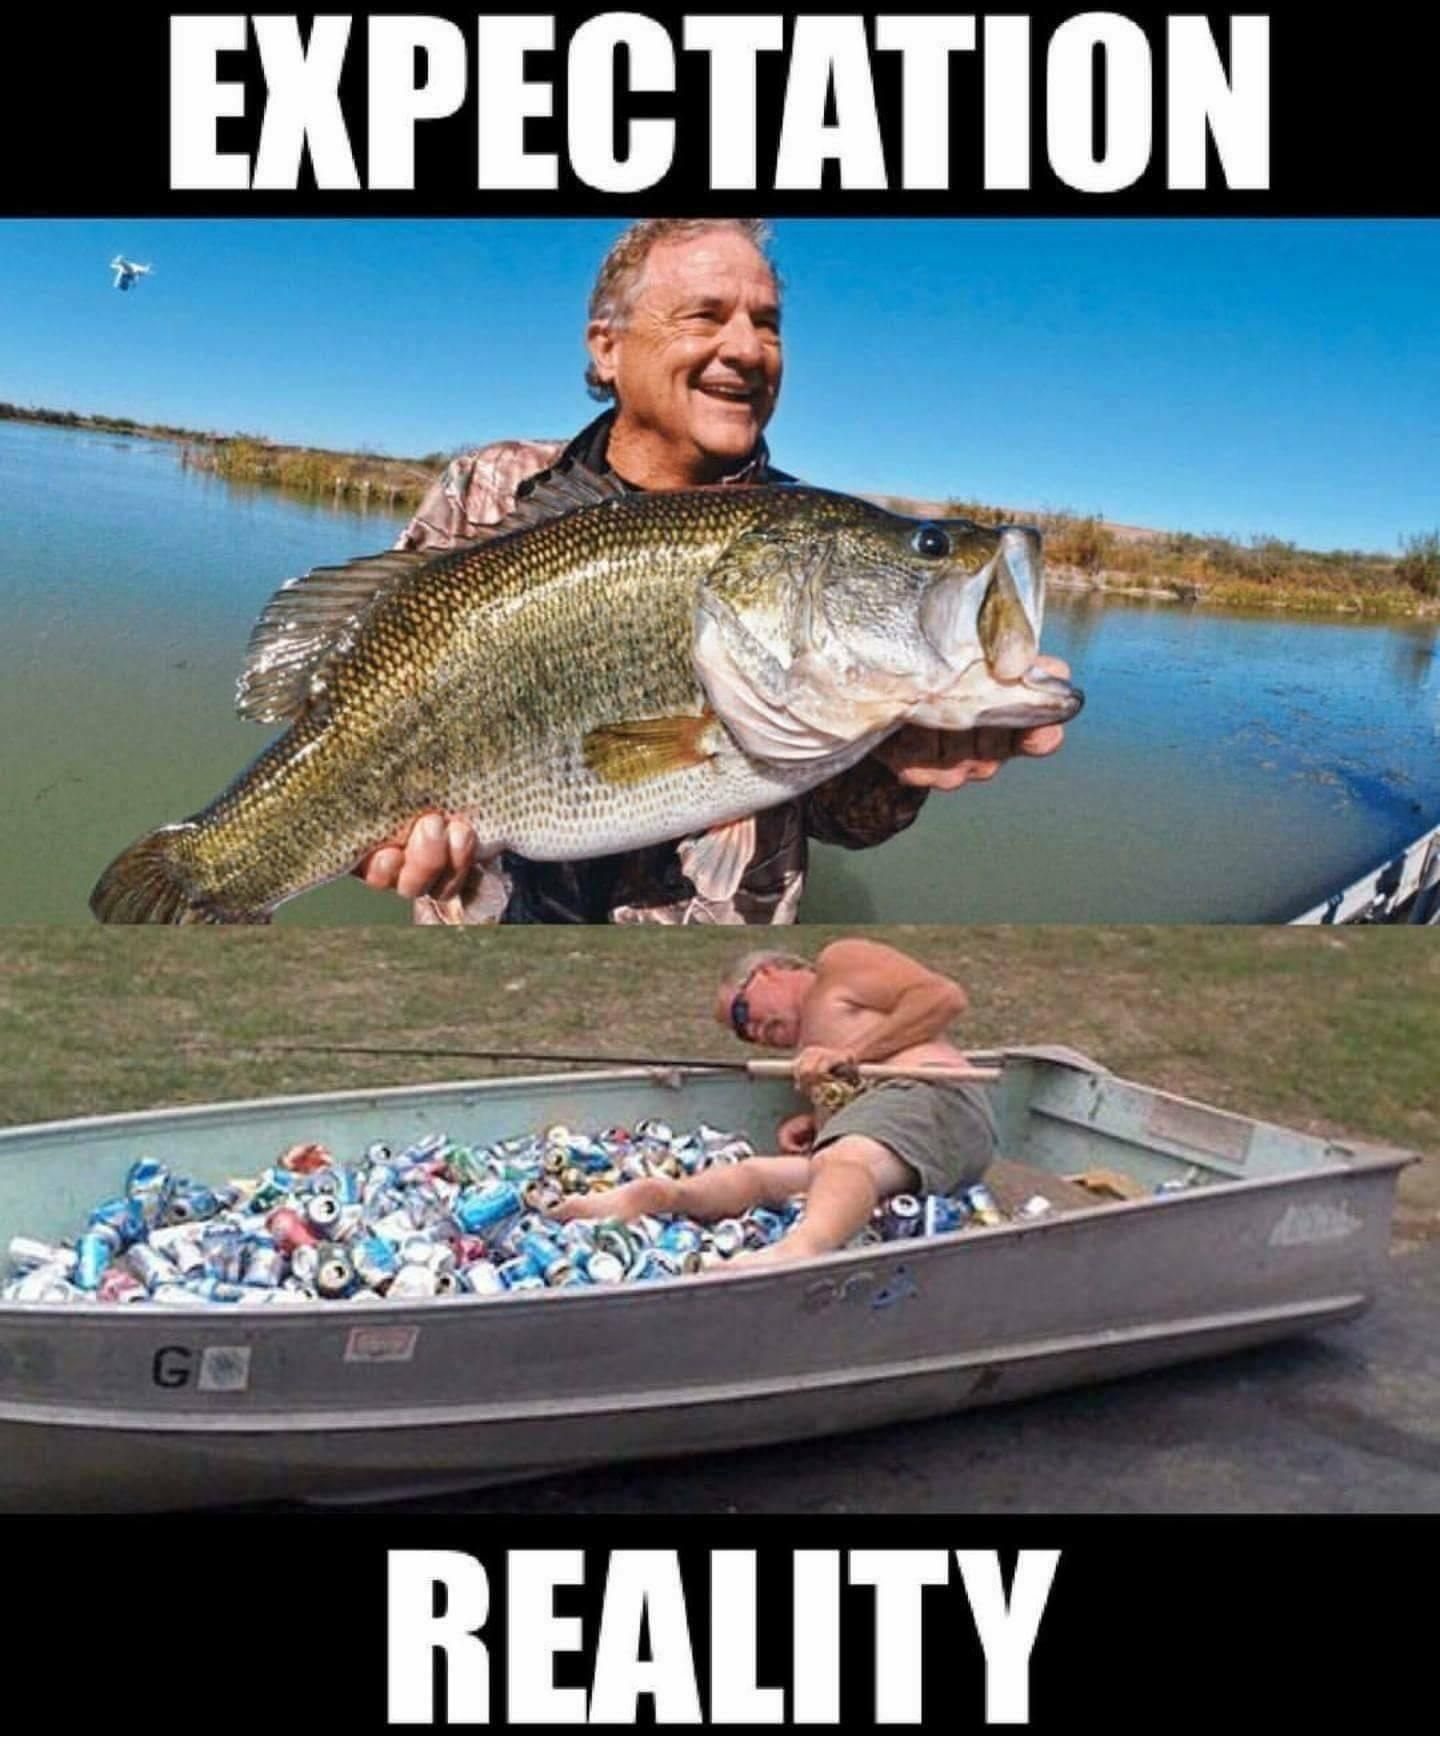 Either way I want to go fishing.